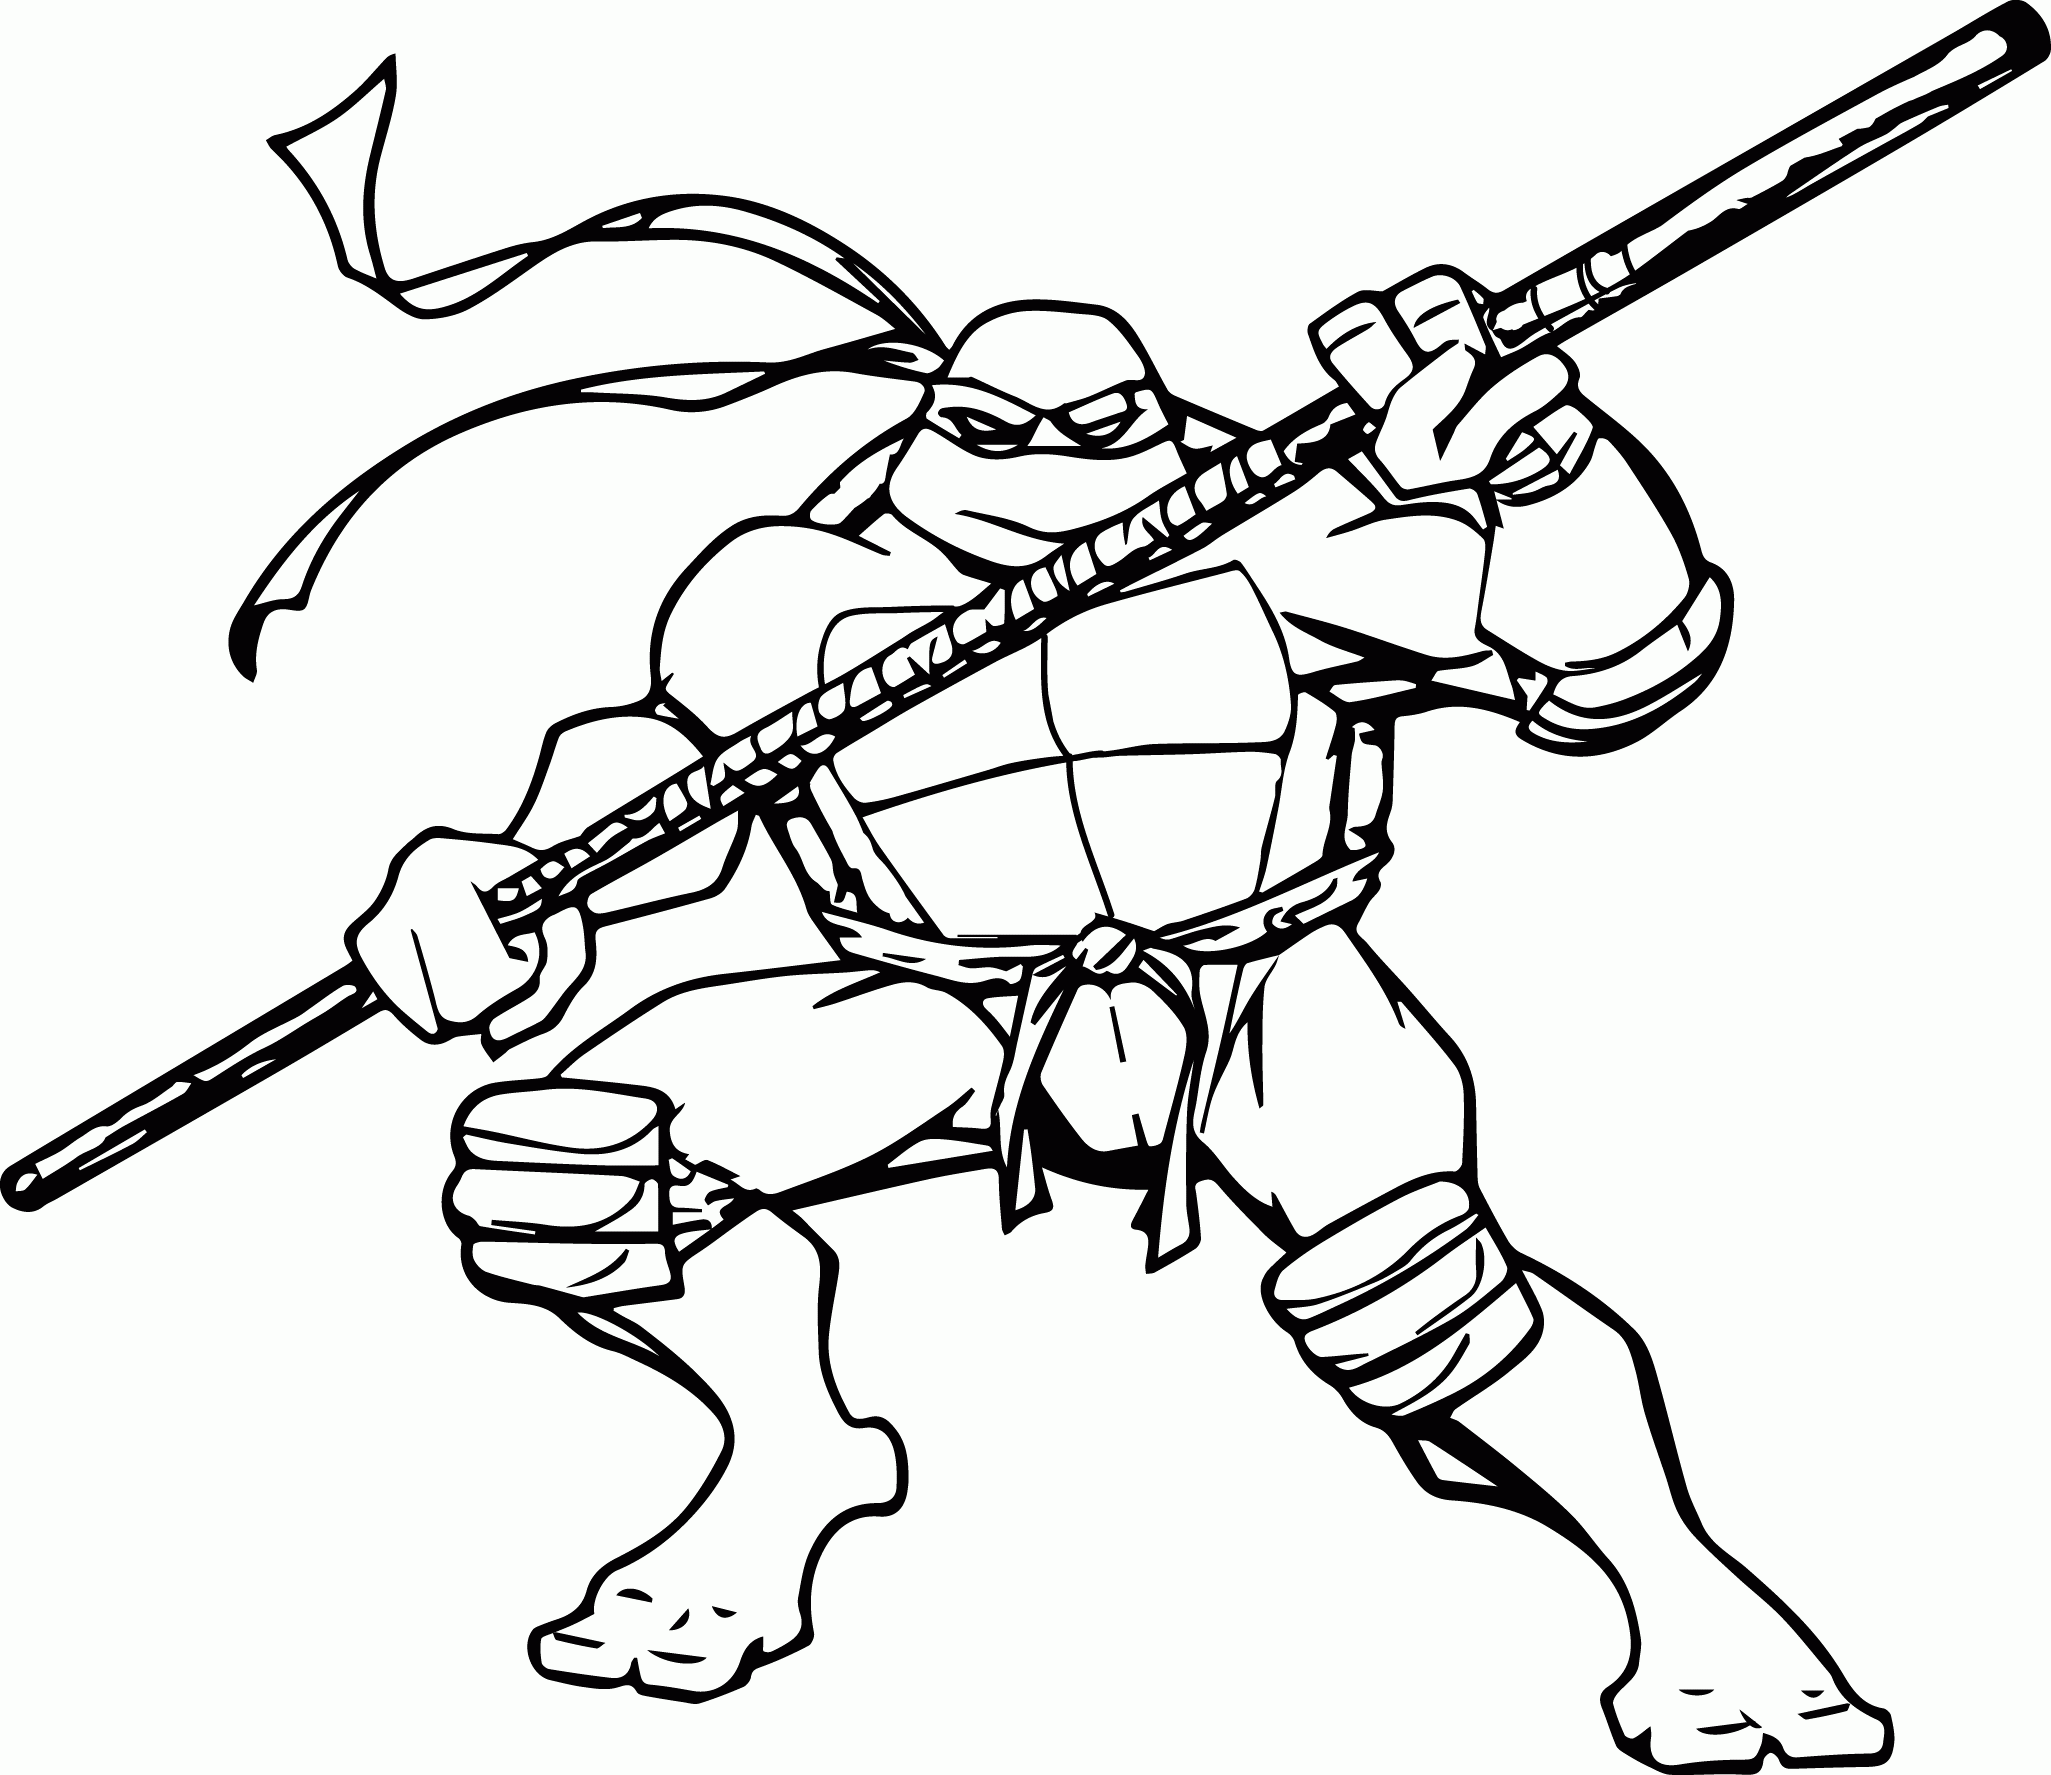 Coloring Page Ninja Turtle - Coloring Pages for Kids and for Adults